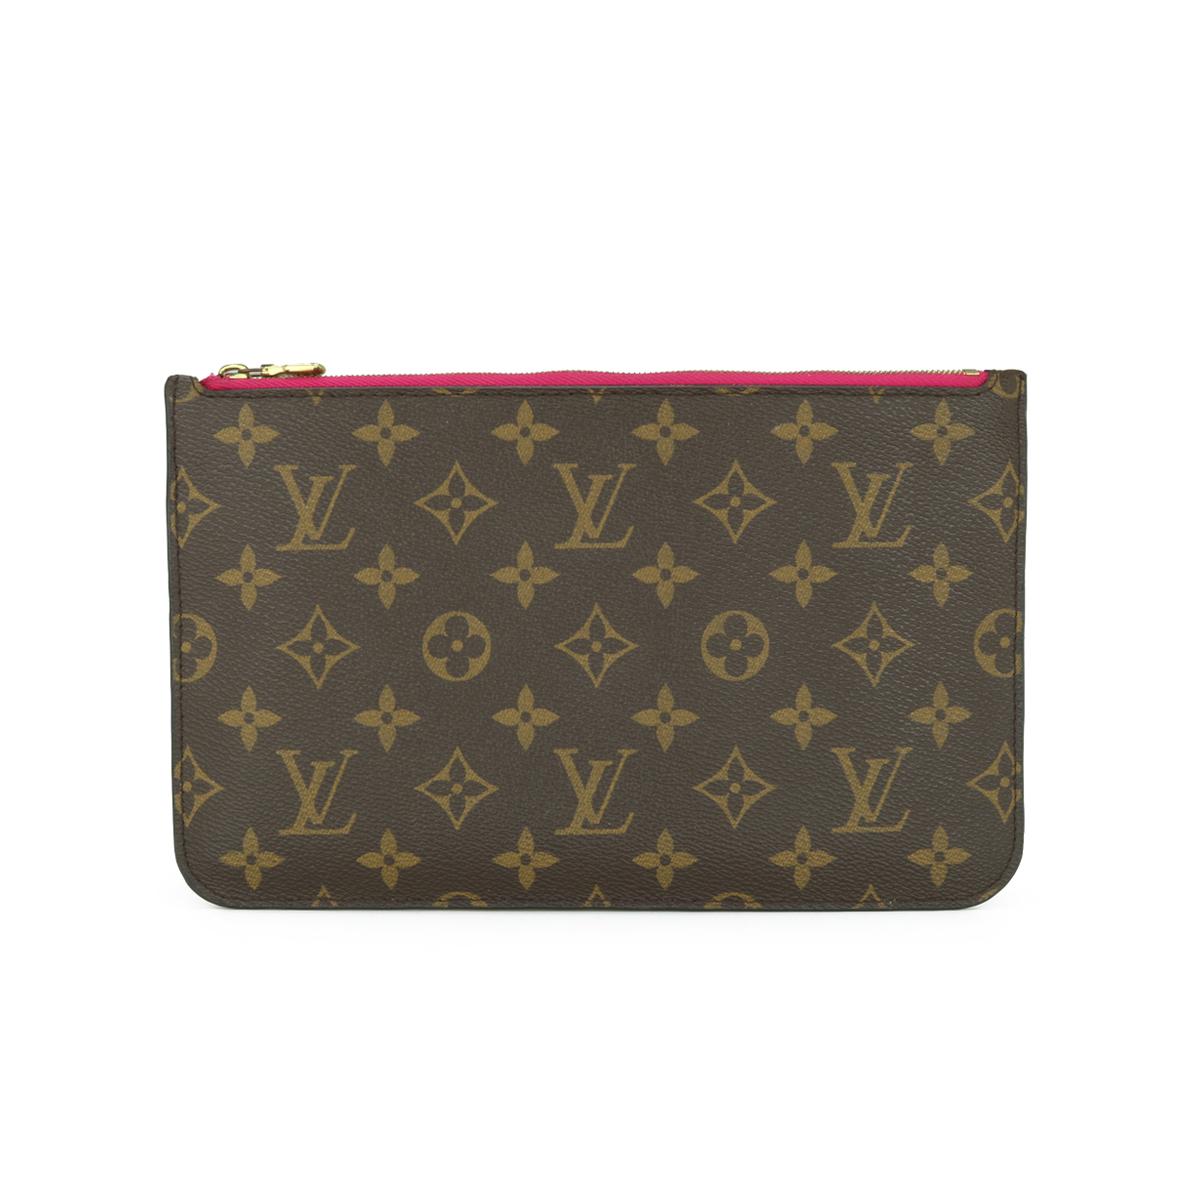 Louis Vuitton Neverfull MM Zip Pochette Pouch in Monogram with Pivoine Interior 2018.

This pouch is in good condition. 

- Exterior Condition: Good condition. There is very tiny inking wear to the two topside endpoints, which is only visible upon